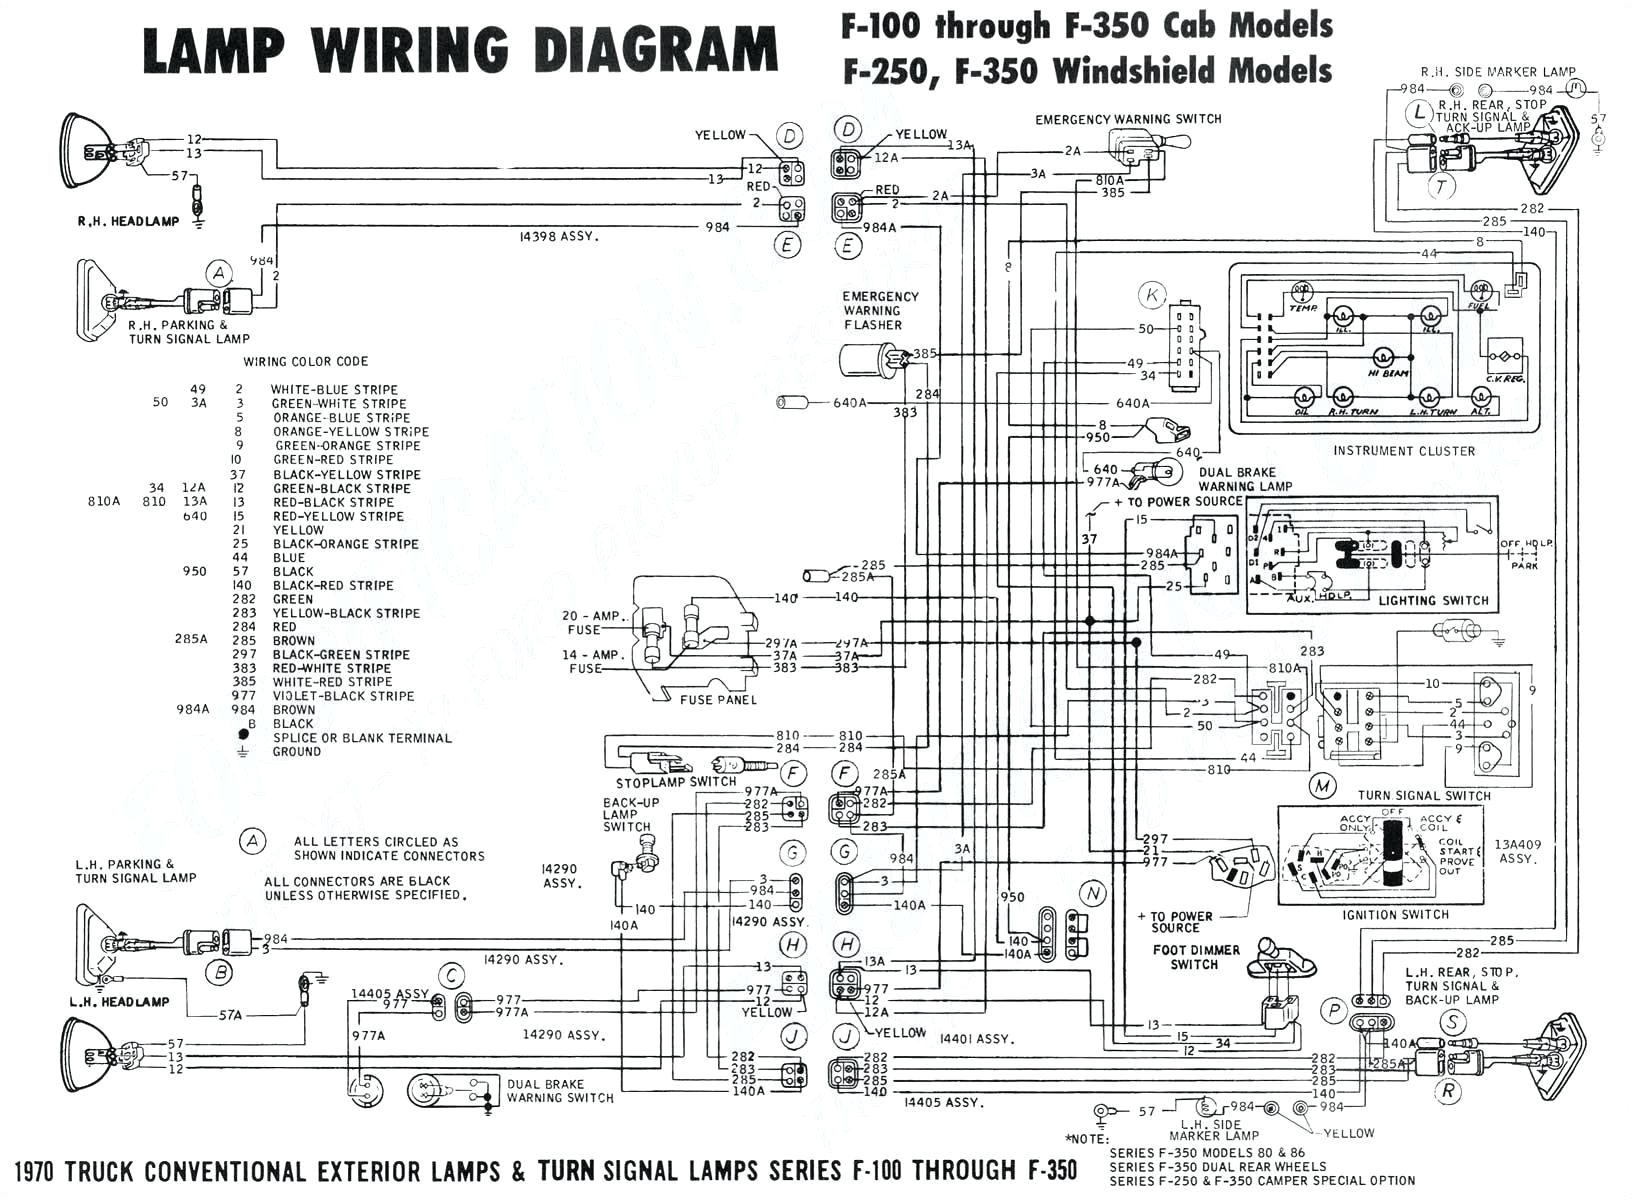 2011 ford f 250 tail light wiring diagram wiring diagram guide for 2011 ford f 250 tail light wiring on